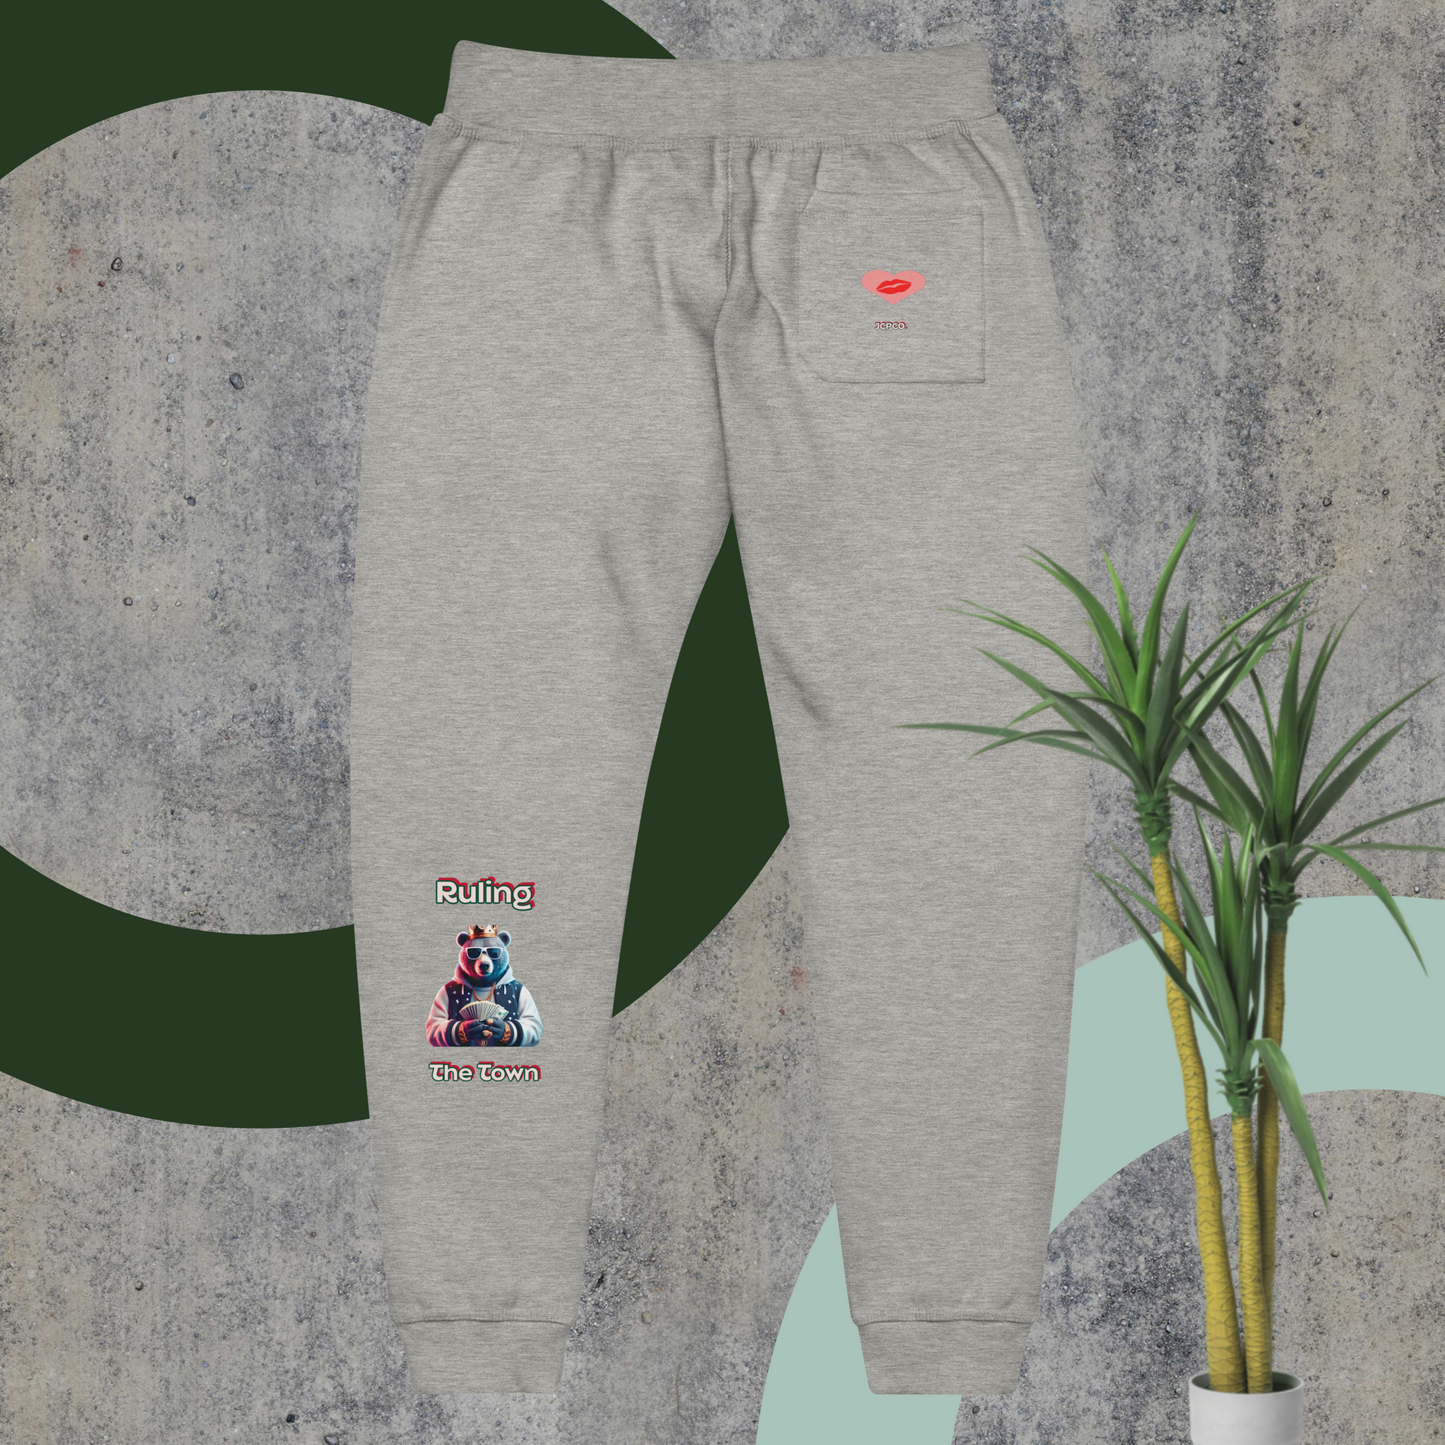 💕The Bear with Cash🐻💵 and a Crown Ruling the Town👑 Unisex fleece sweatpants👖